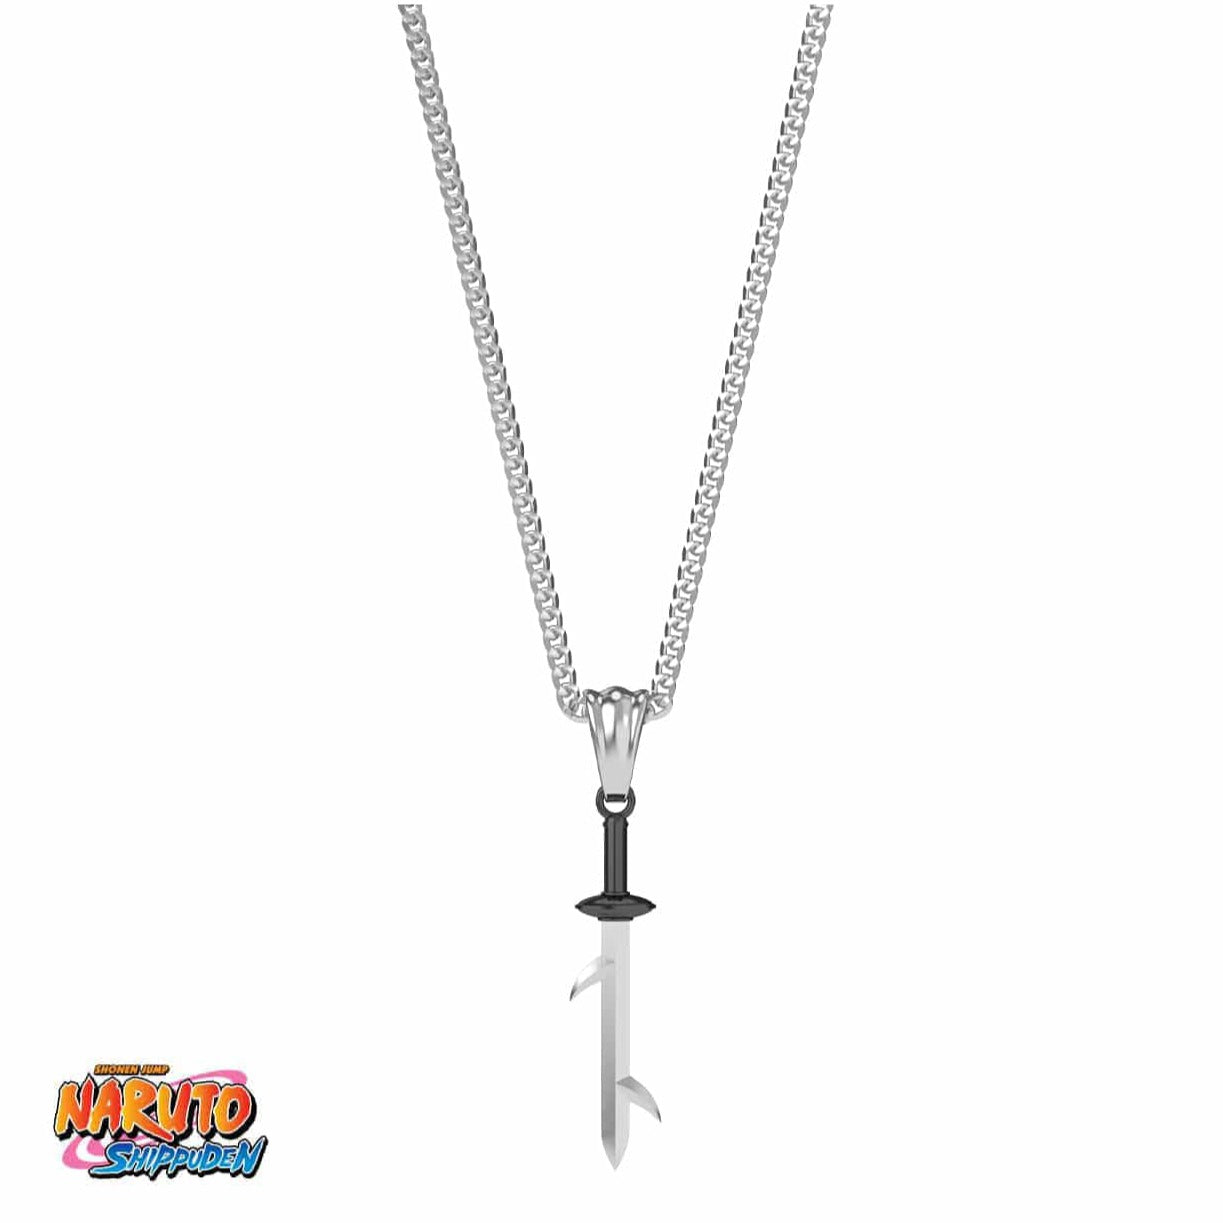 Naruto™ Fang Sword Necklace Mister SFC